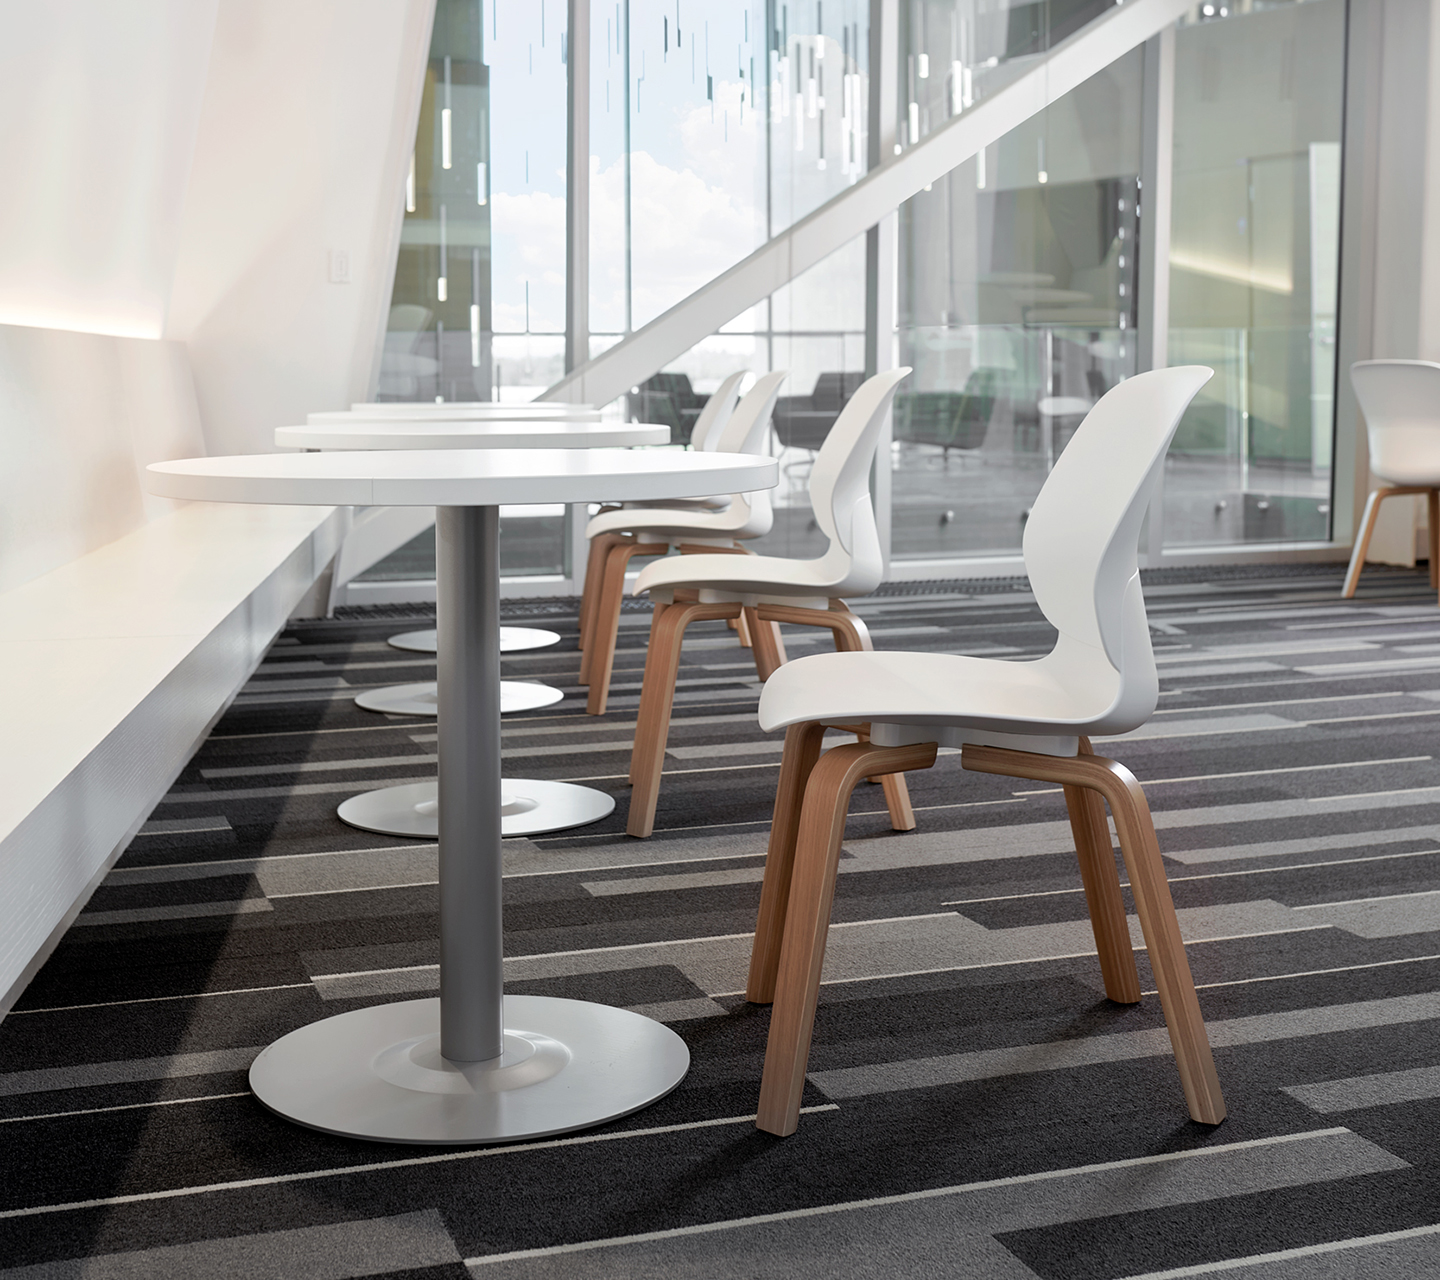 Haworth Maari chairs in white plastic base and wooden legs in a Dolese workspace